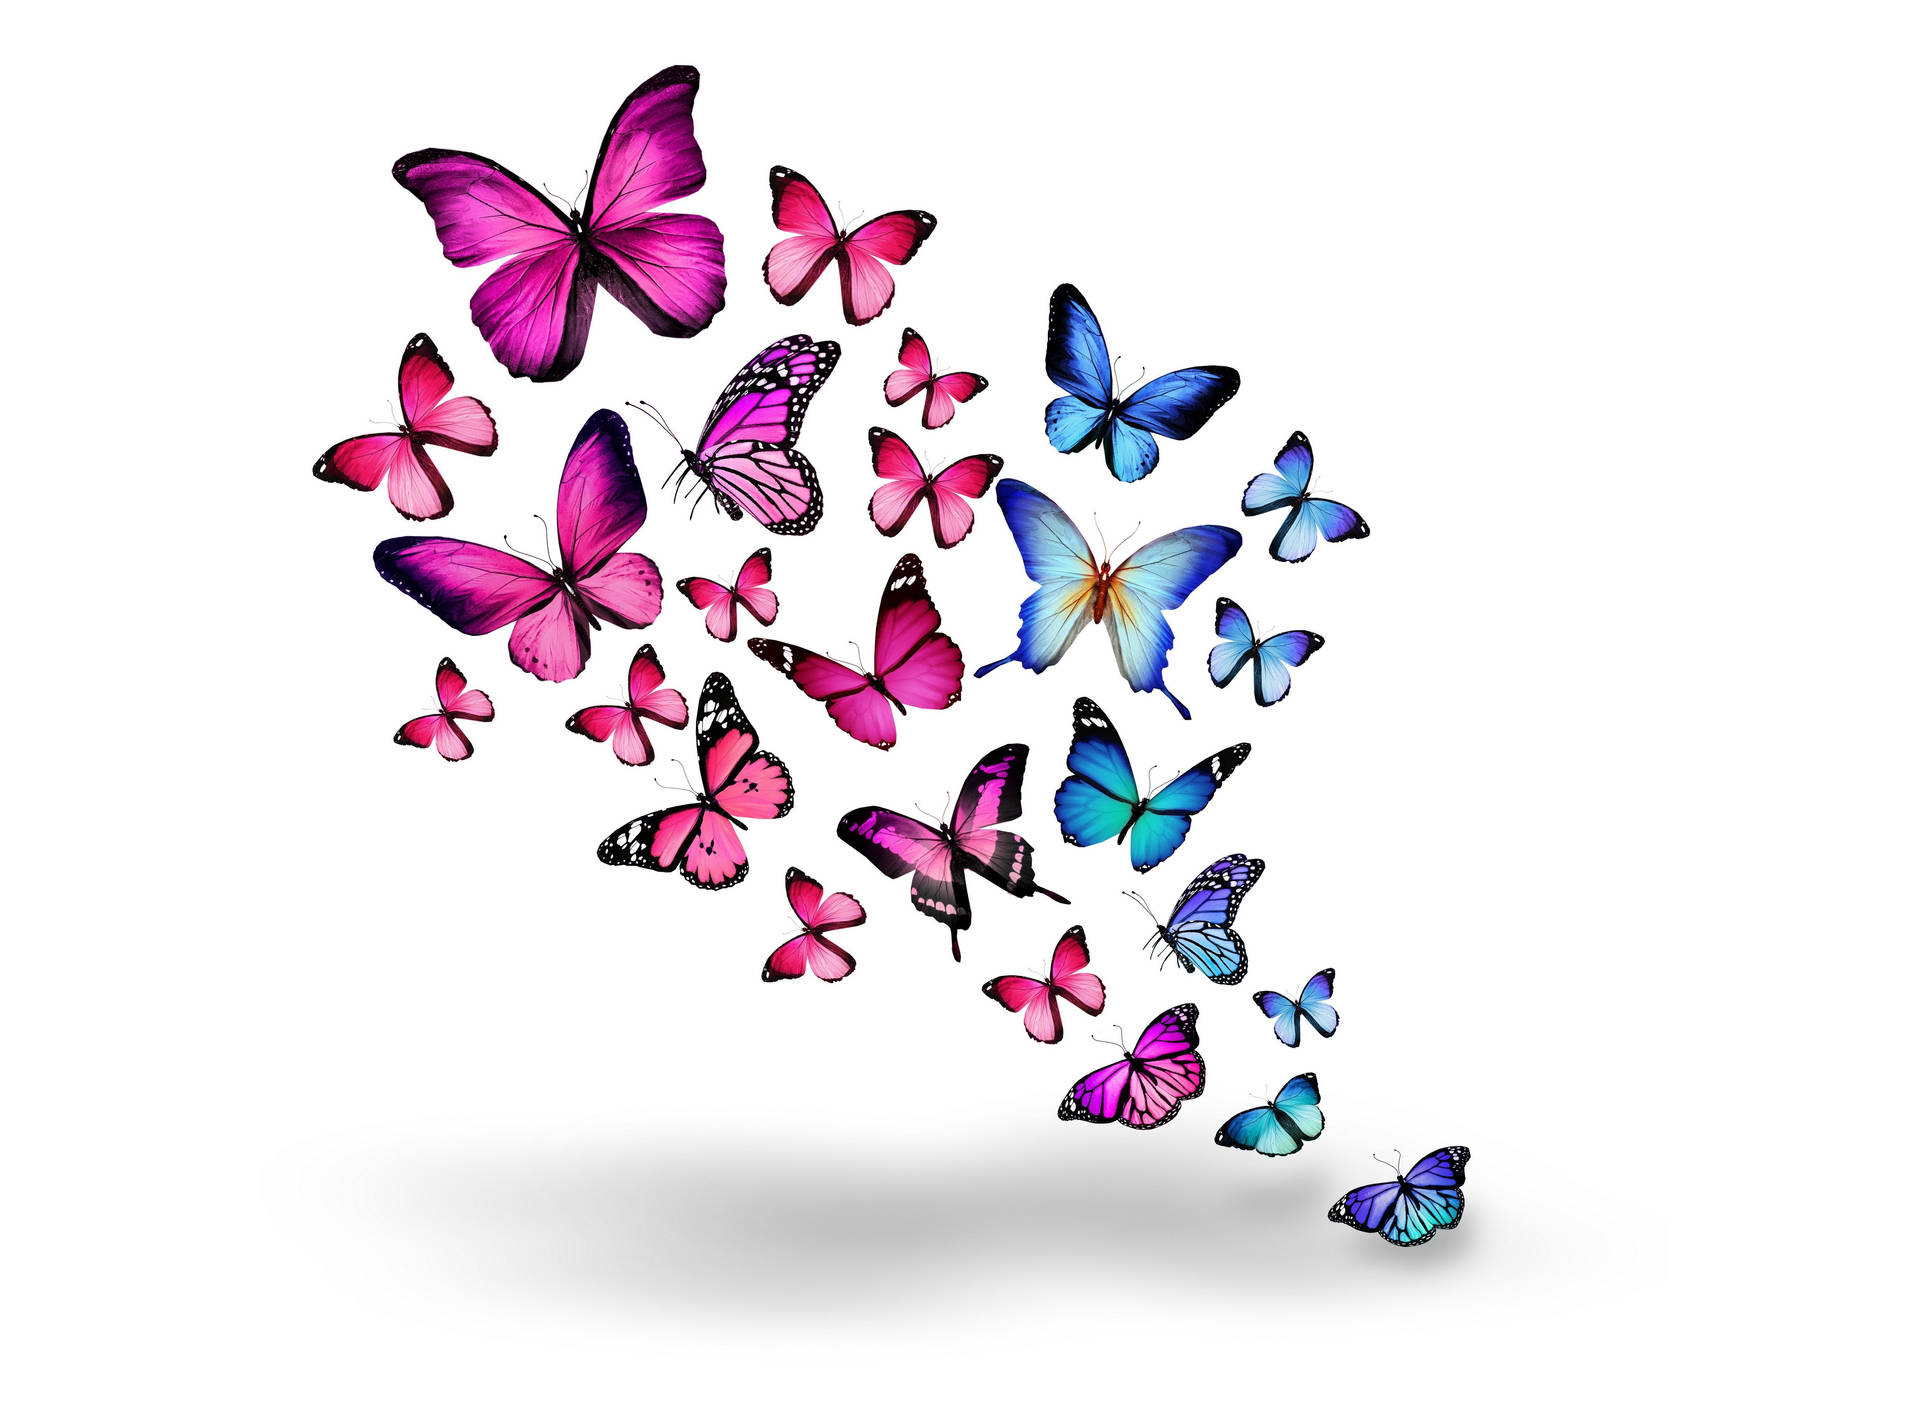 Swarm Of Pink And Blue Butterflies Background